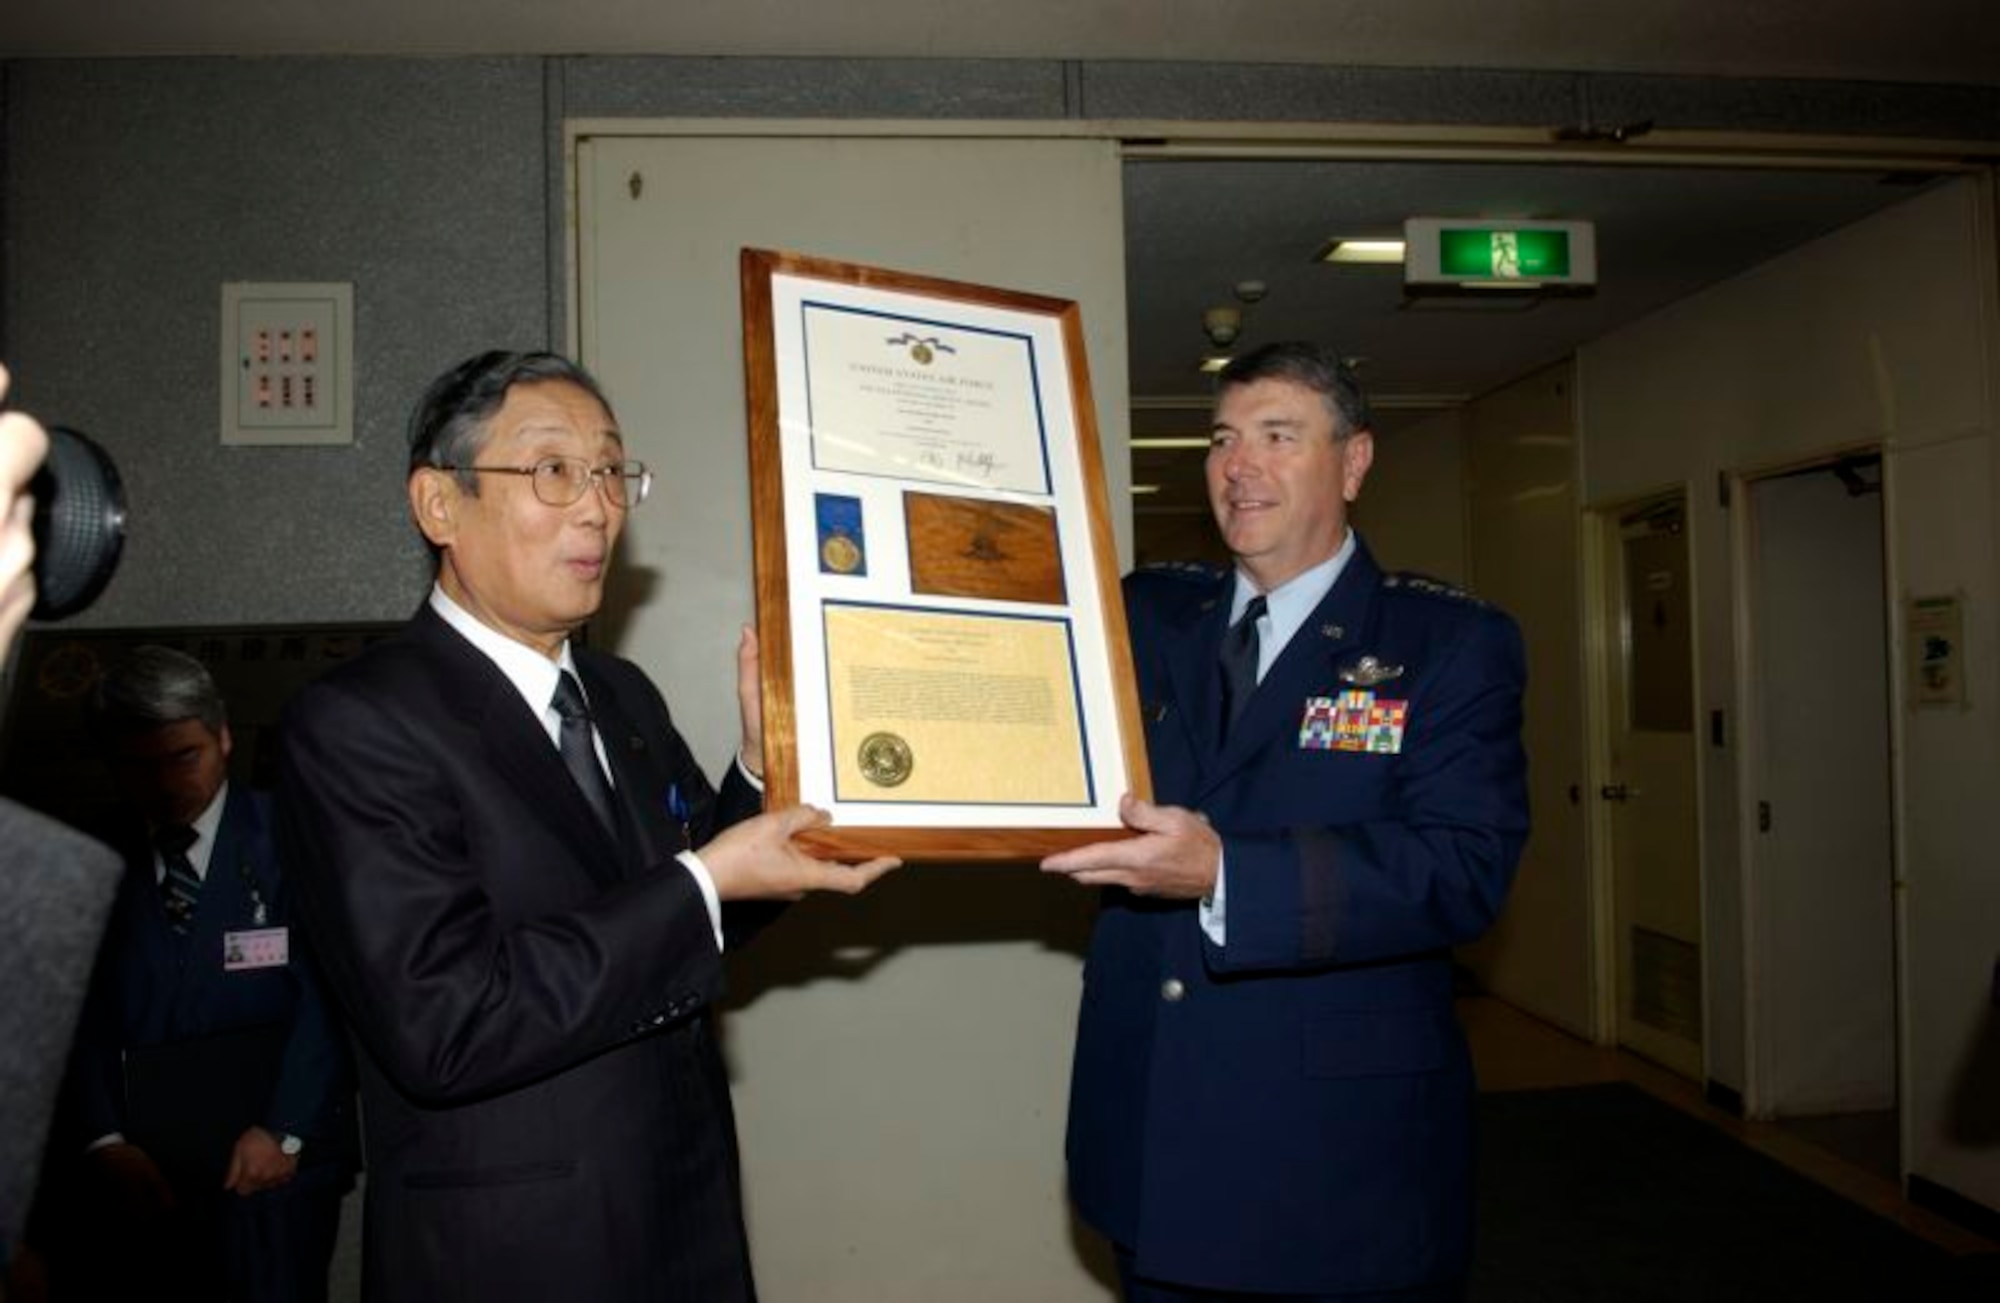 01/31/2007 -- MISAWA CITY, Japan -- Gen. Paul Hester, Pacific Air Forces commander presents the Air Force Exemplary Civilian Service award to Misawa City Mayor Shigeyoshi Suzuki. This is the first time a Japanese official has been presented with an Air Force level award. (U.S. Air Force photo by Senior Airman Robert Barnett)